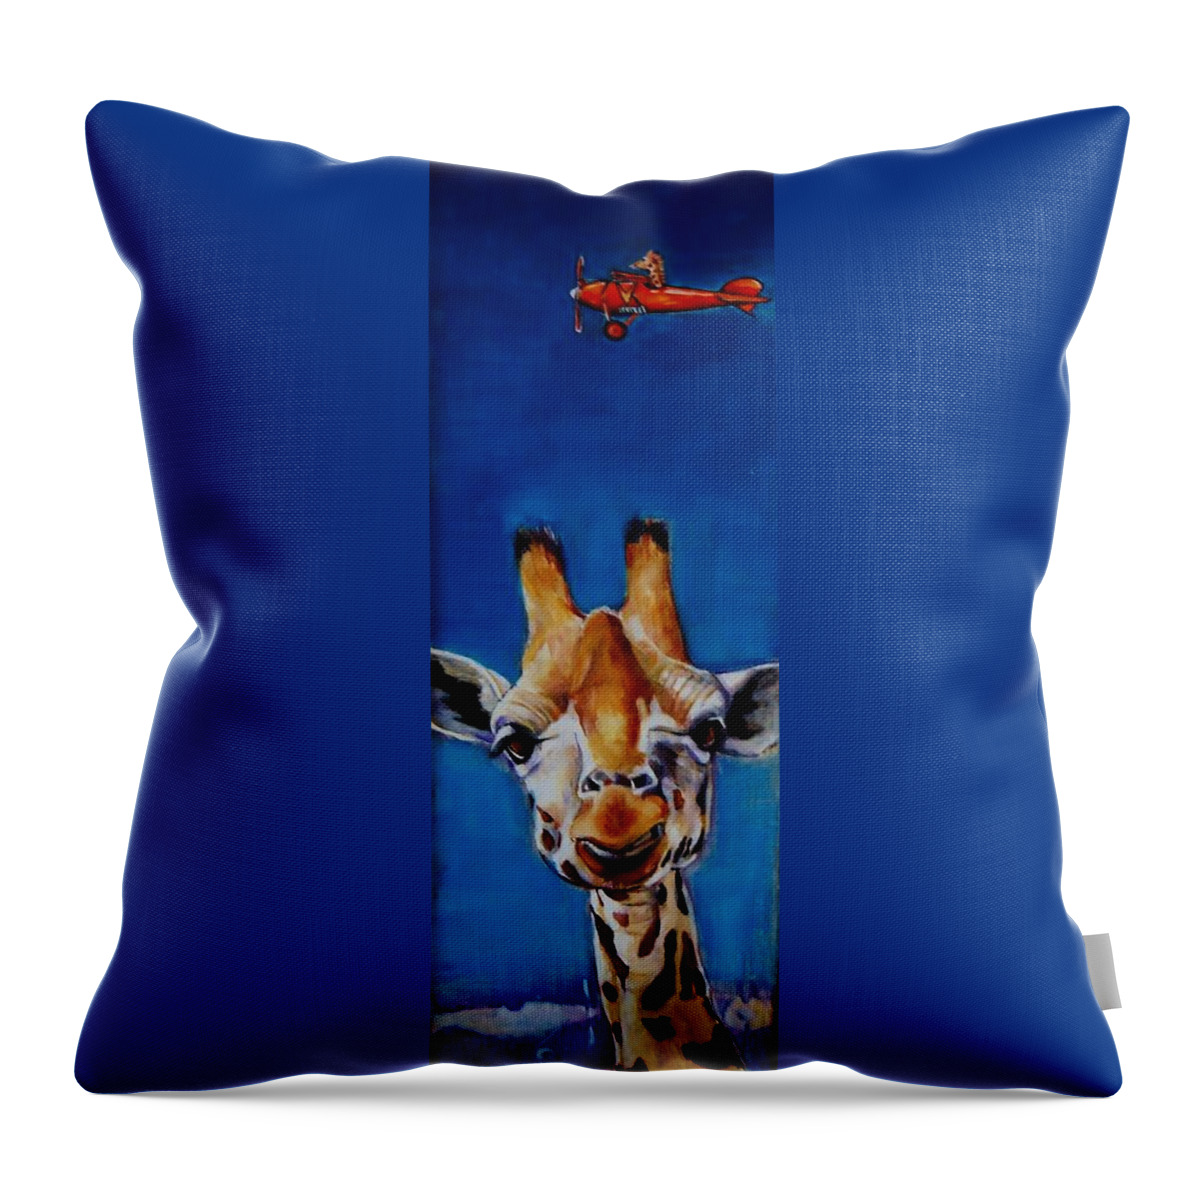 Giraffe Throw Pillow featuring the painting The Air Up There by Jean Cormier